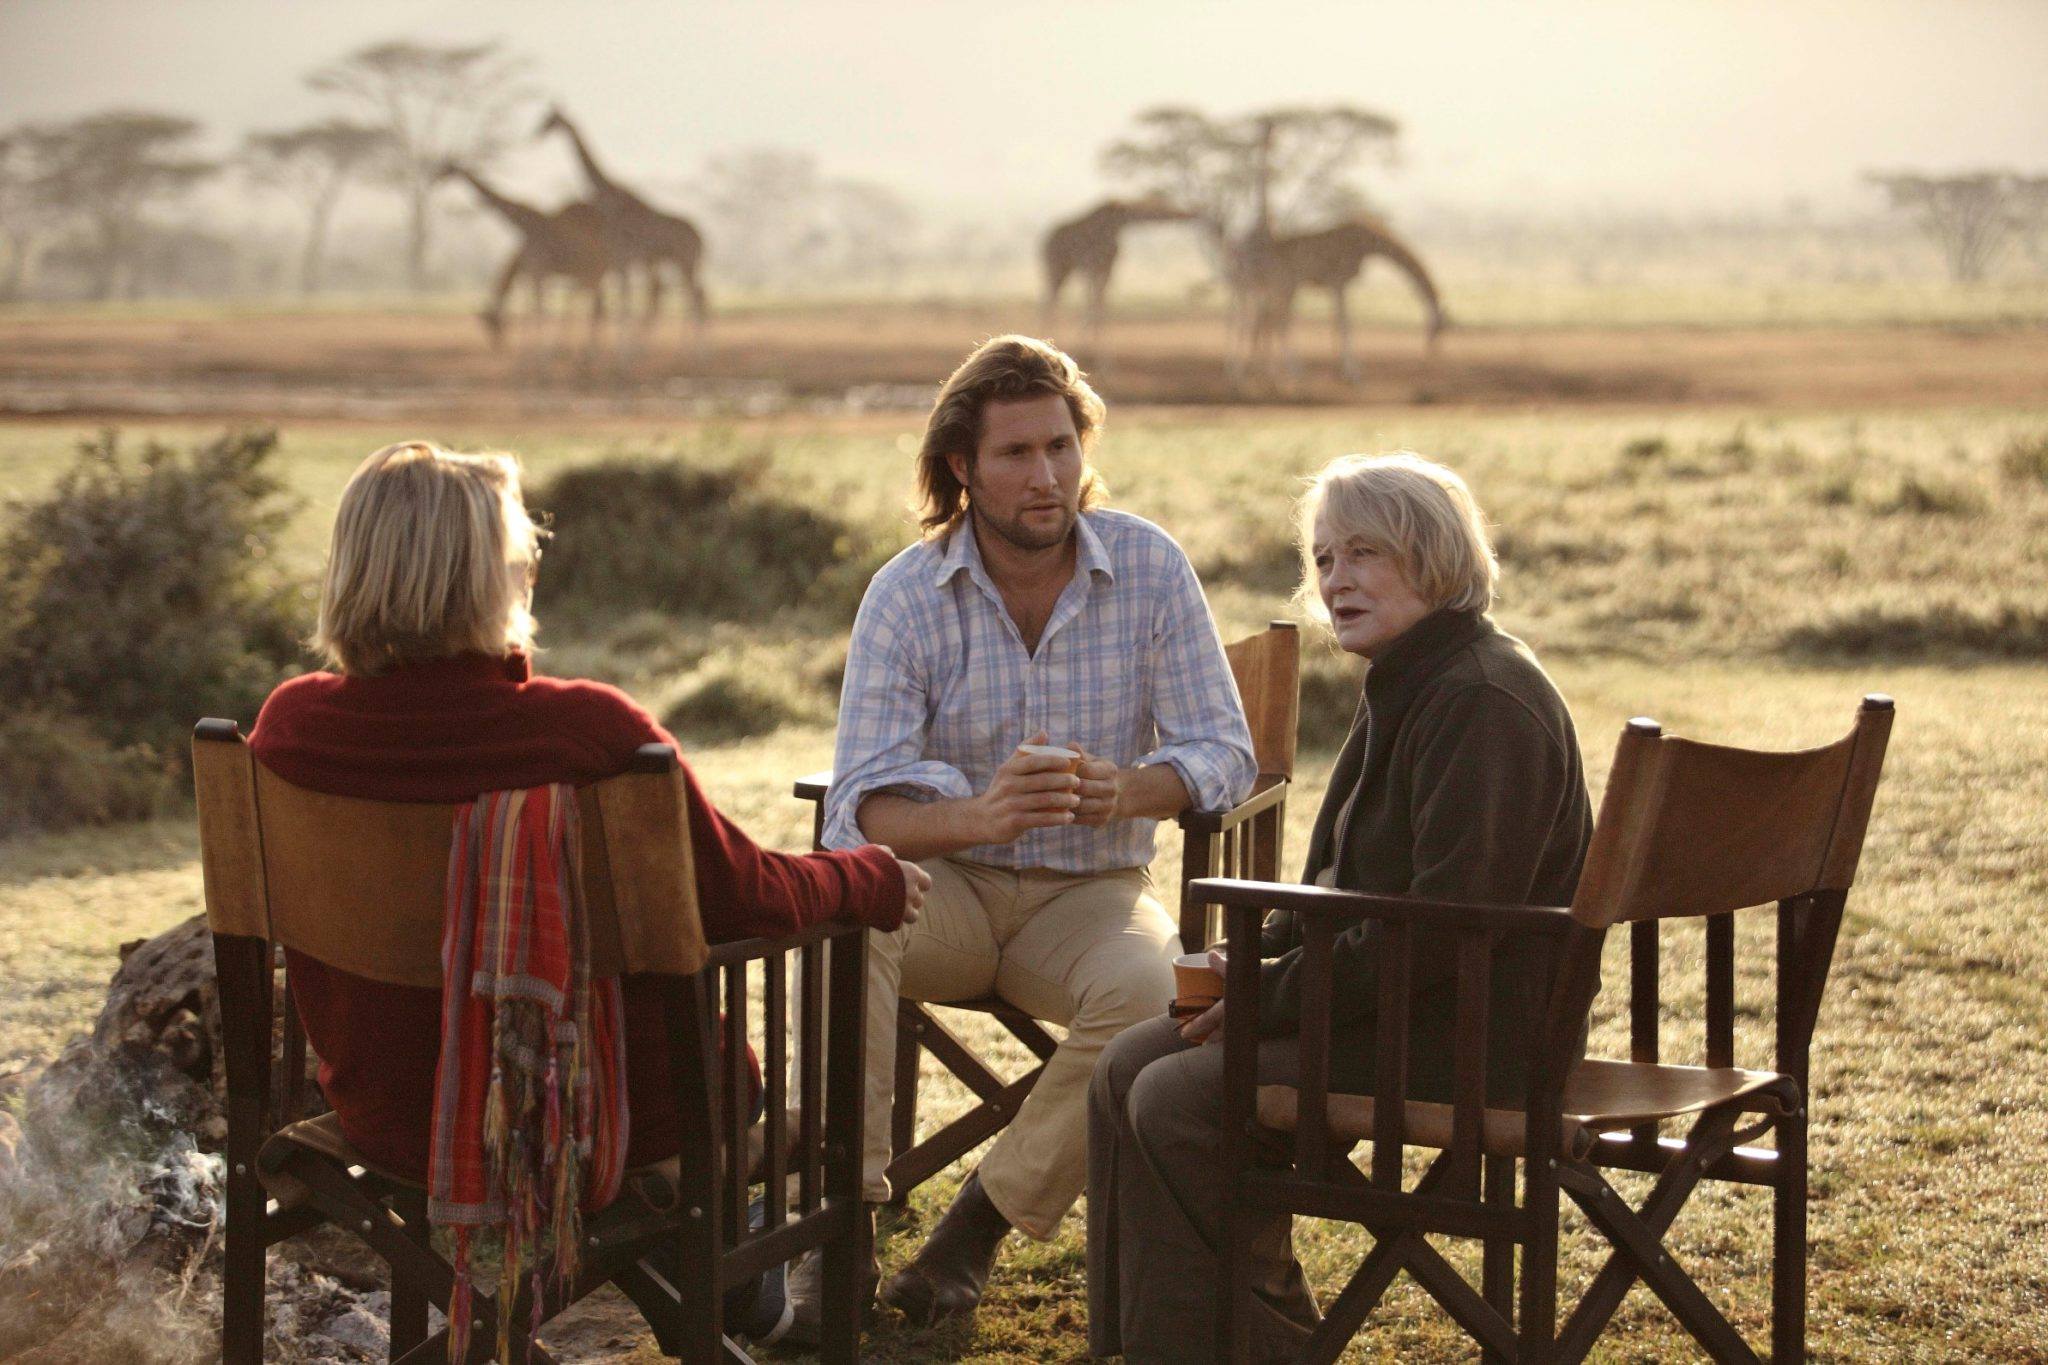 9 Perfect Properties for a Multigenerational Safari, A family enjoys quality time together as wildlife roams on the plains that surround Enasoit Camp. ©Enasoit Camp